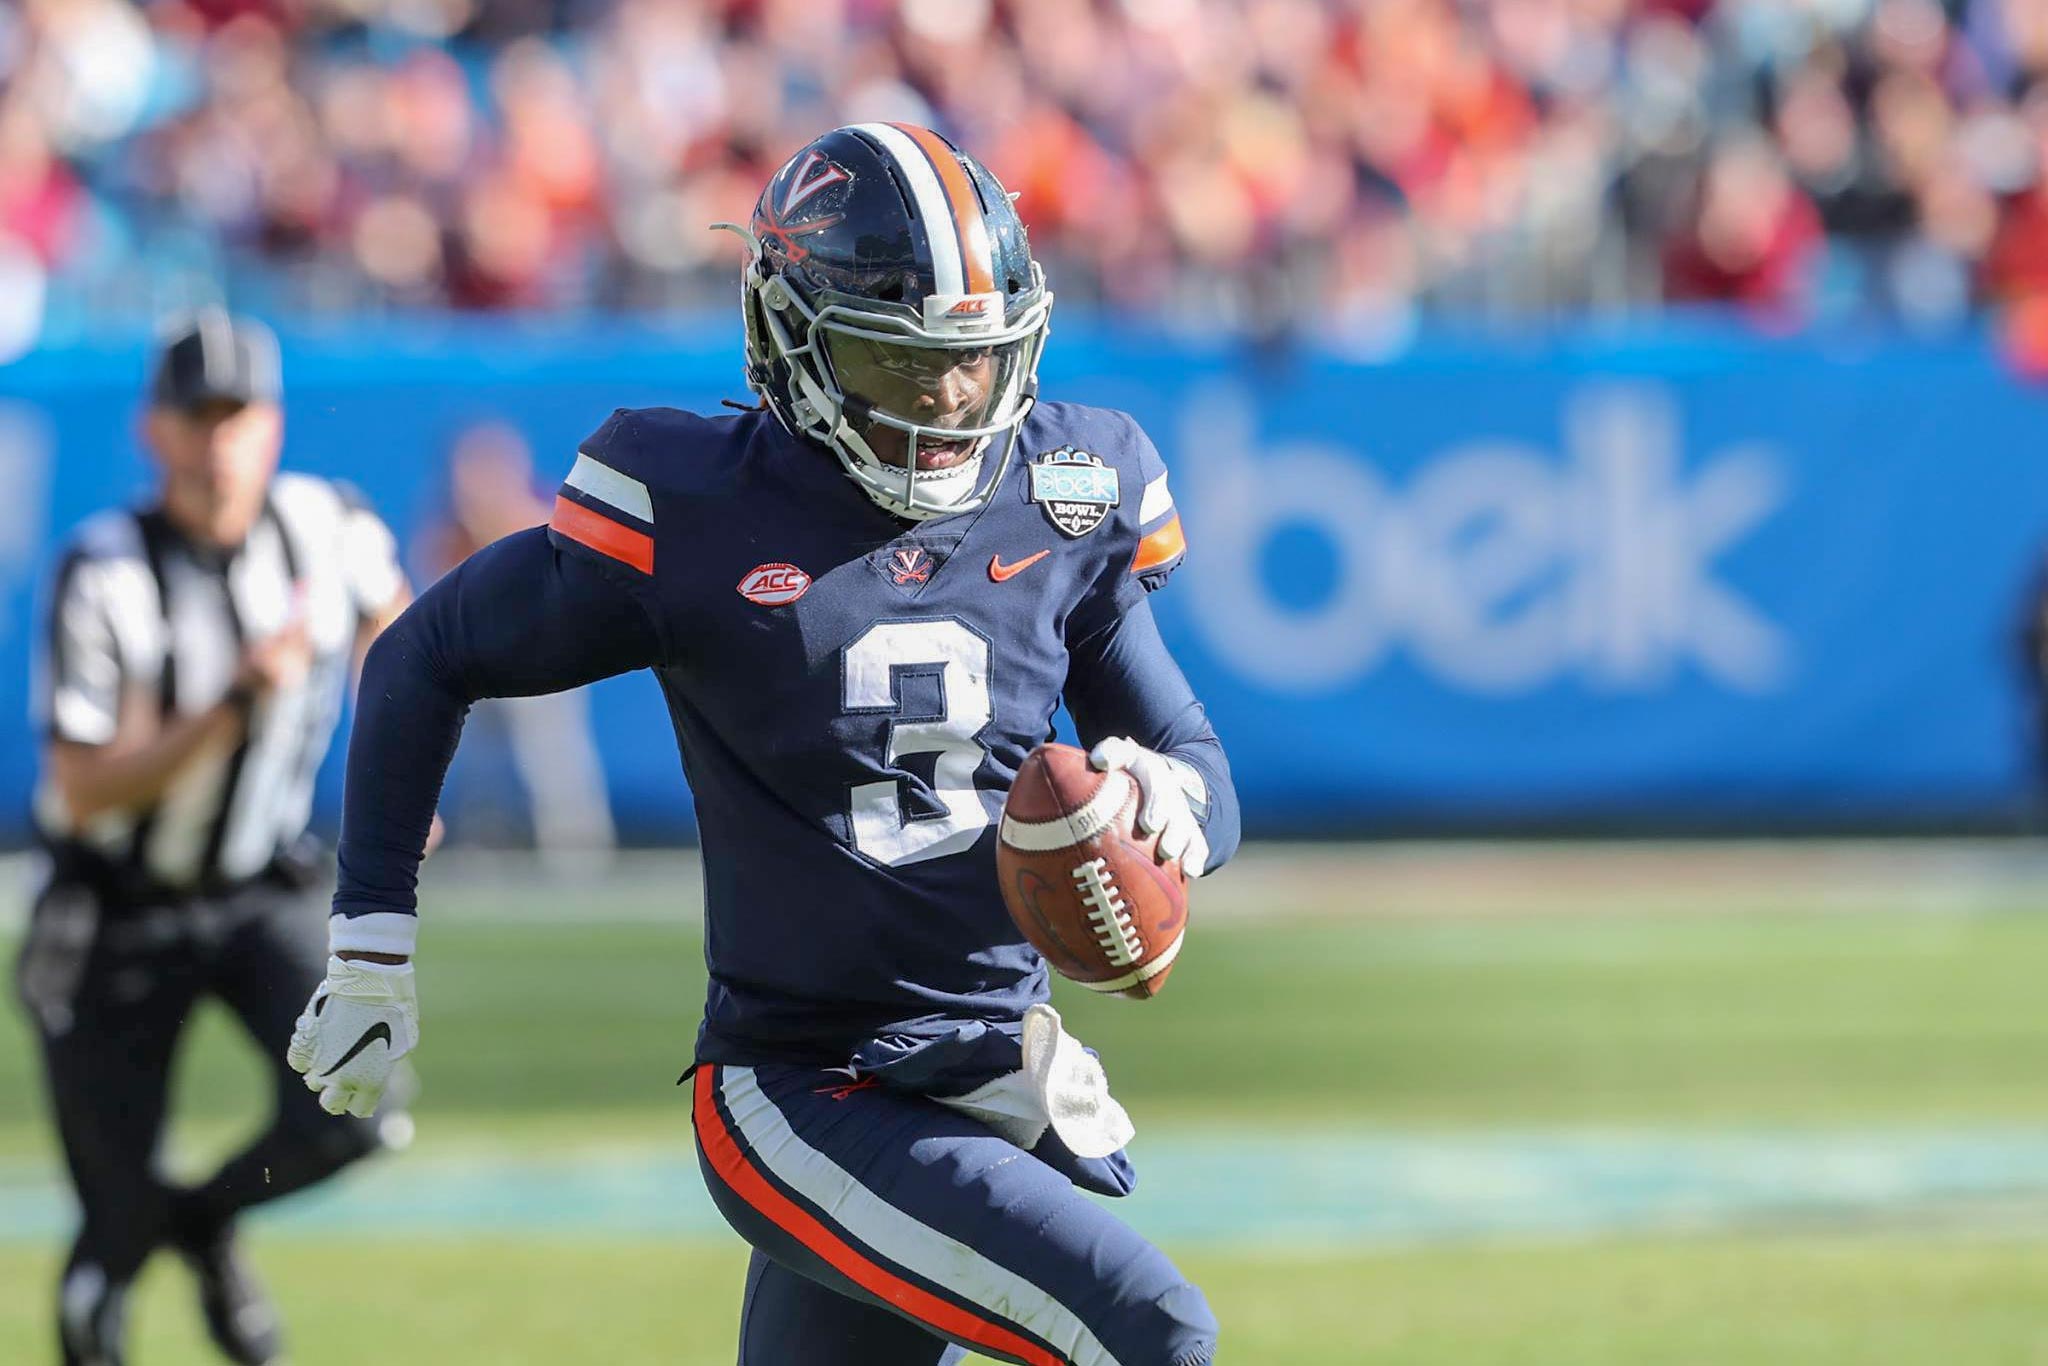 Bryce Perkins runs with the ball during the Belk bowl game